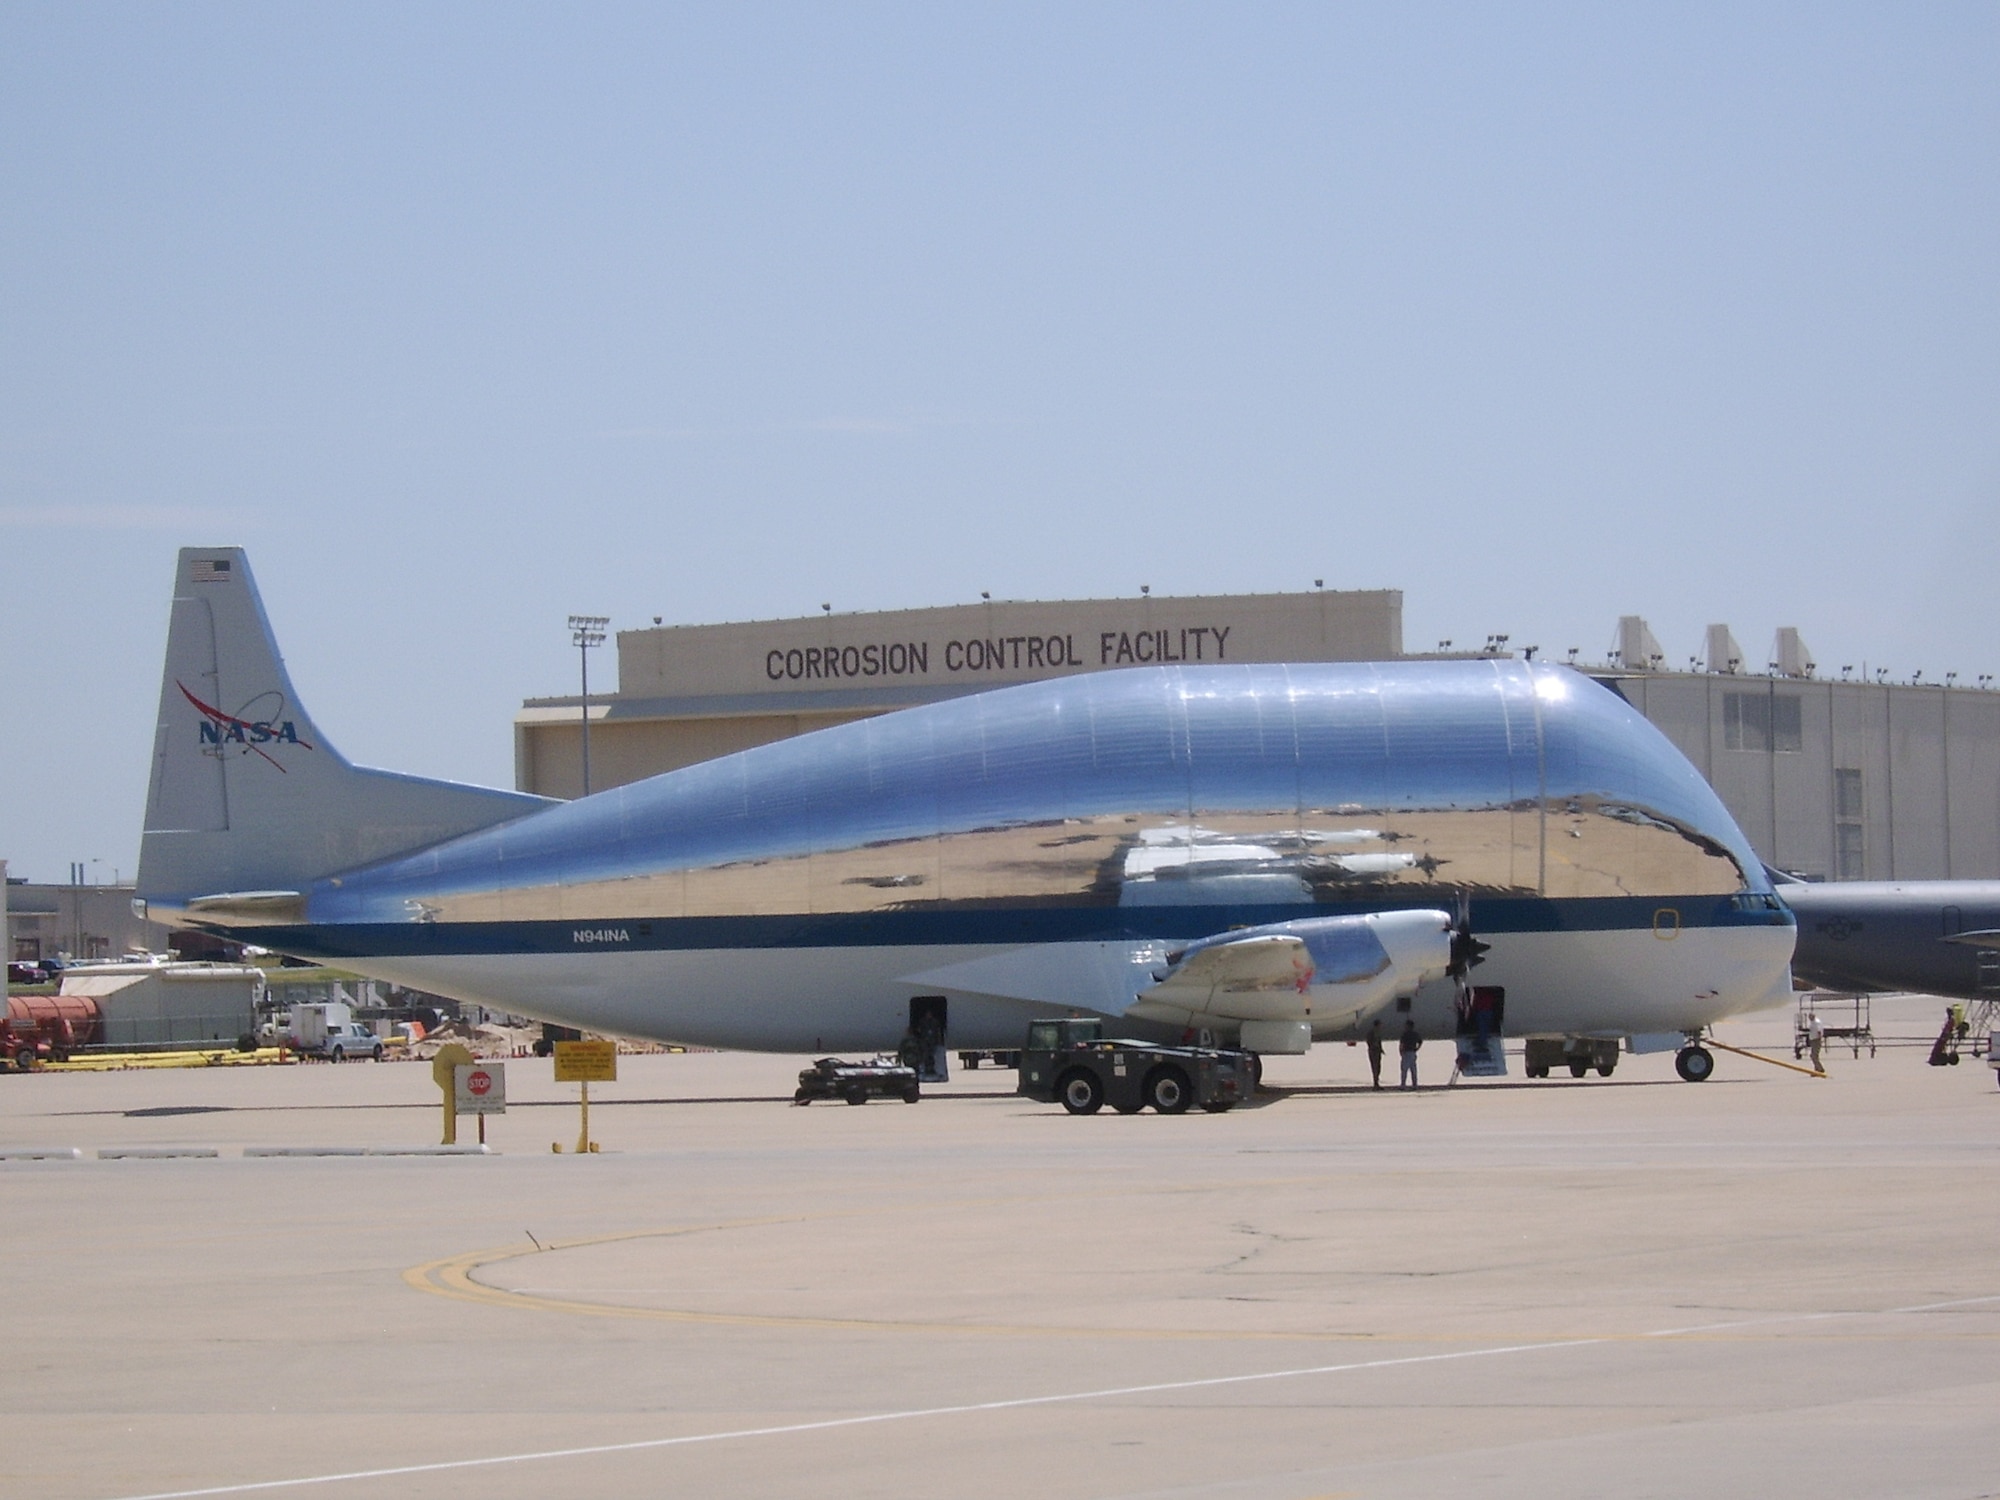 The Apollo program’s legacy and Tinker’s association with support for NASA continues to this day with NASA’s B-377SGT which is the last of four built. The “Super Guppy Transport” aircraft moves outsized cargo and equipment for ongoing space exploration programs for NASA and was overhauled and painted at Tinker in recent years. (Tinker History Office photo)